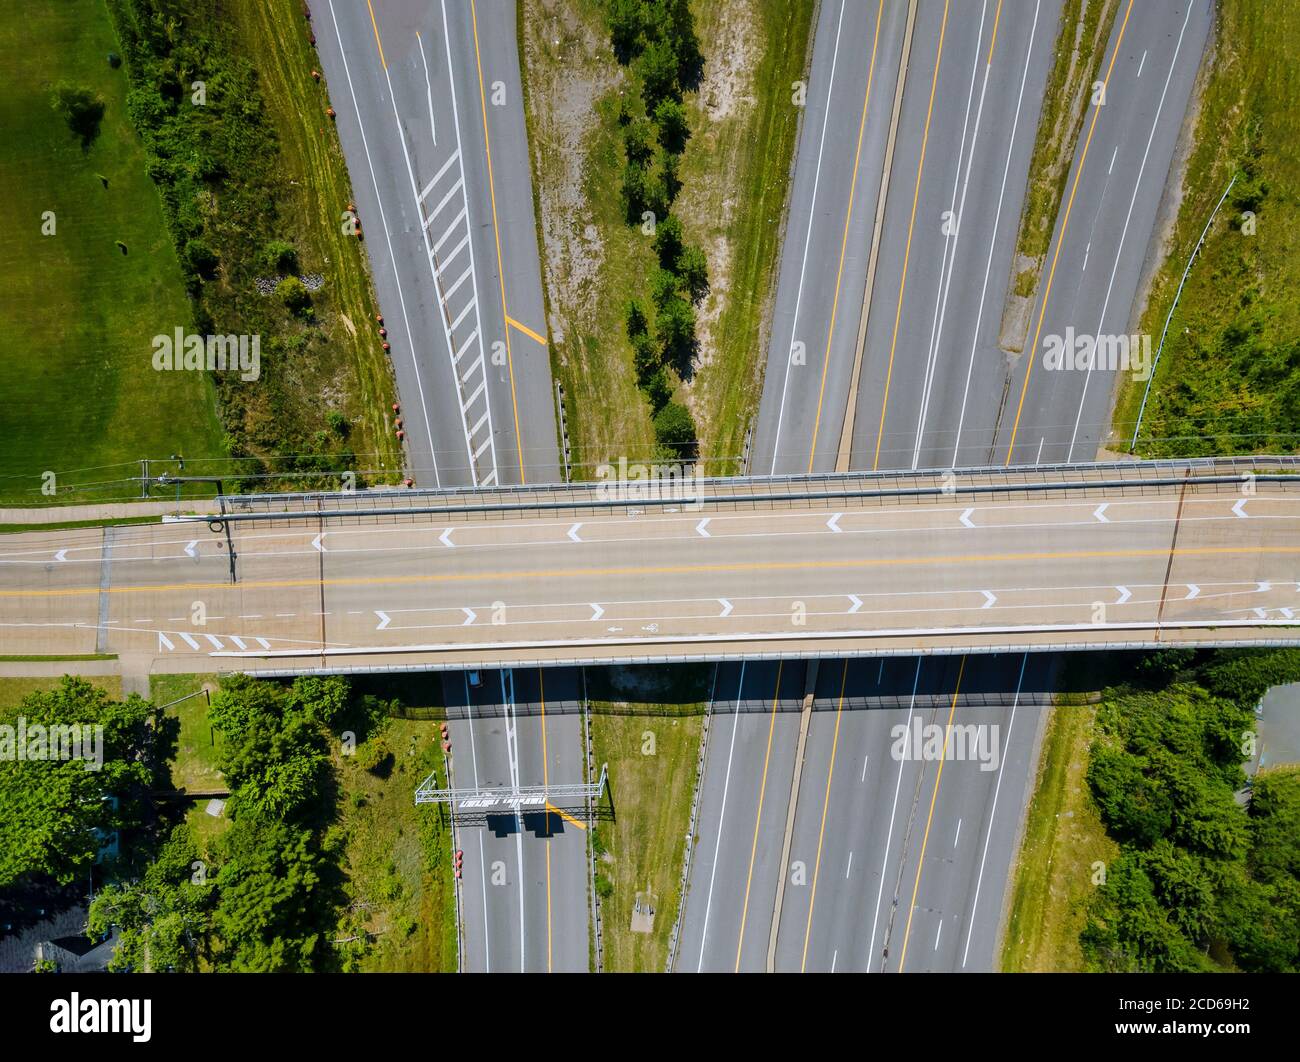 Aerial view of modern transportation with highway interchange multiple road interchanges Cleveland Ohio USA Stock Photo